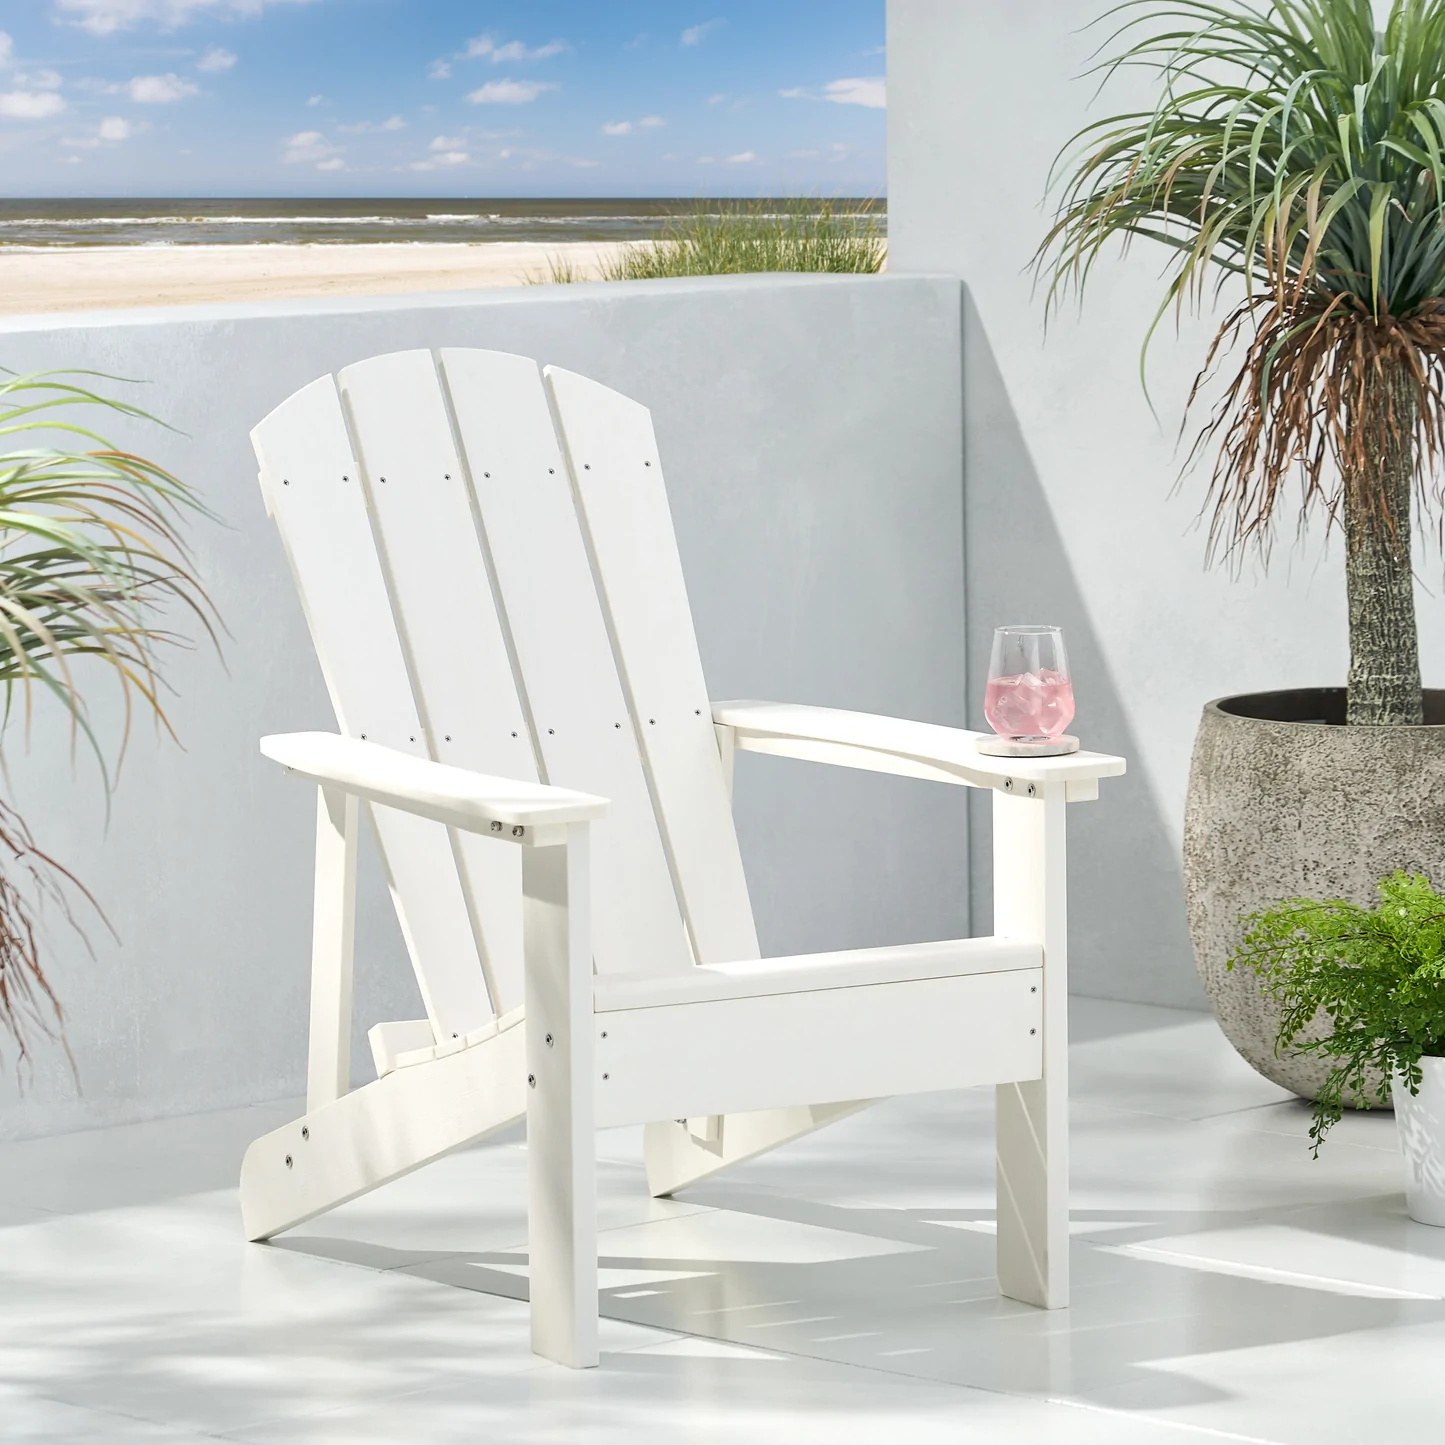 KUIKUI Classic Pure White Outdoor Solid Wood Adirondack Chair Garden Lounge Chair - image 1 of 5